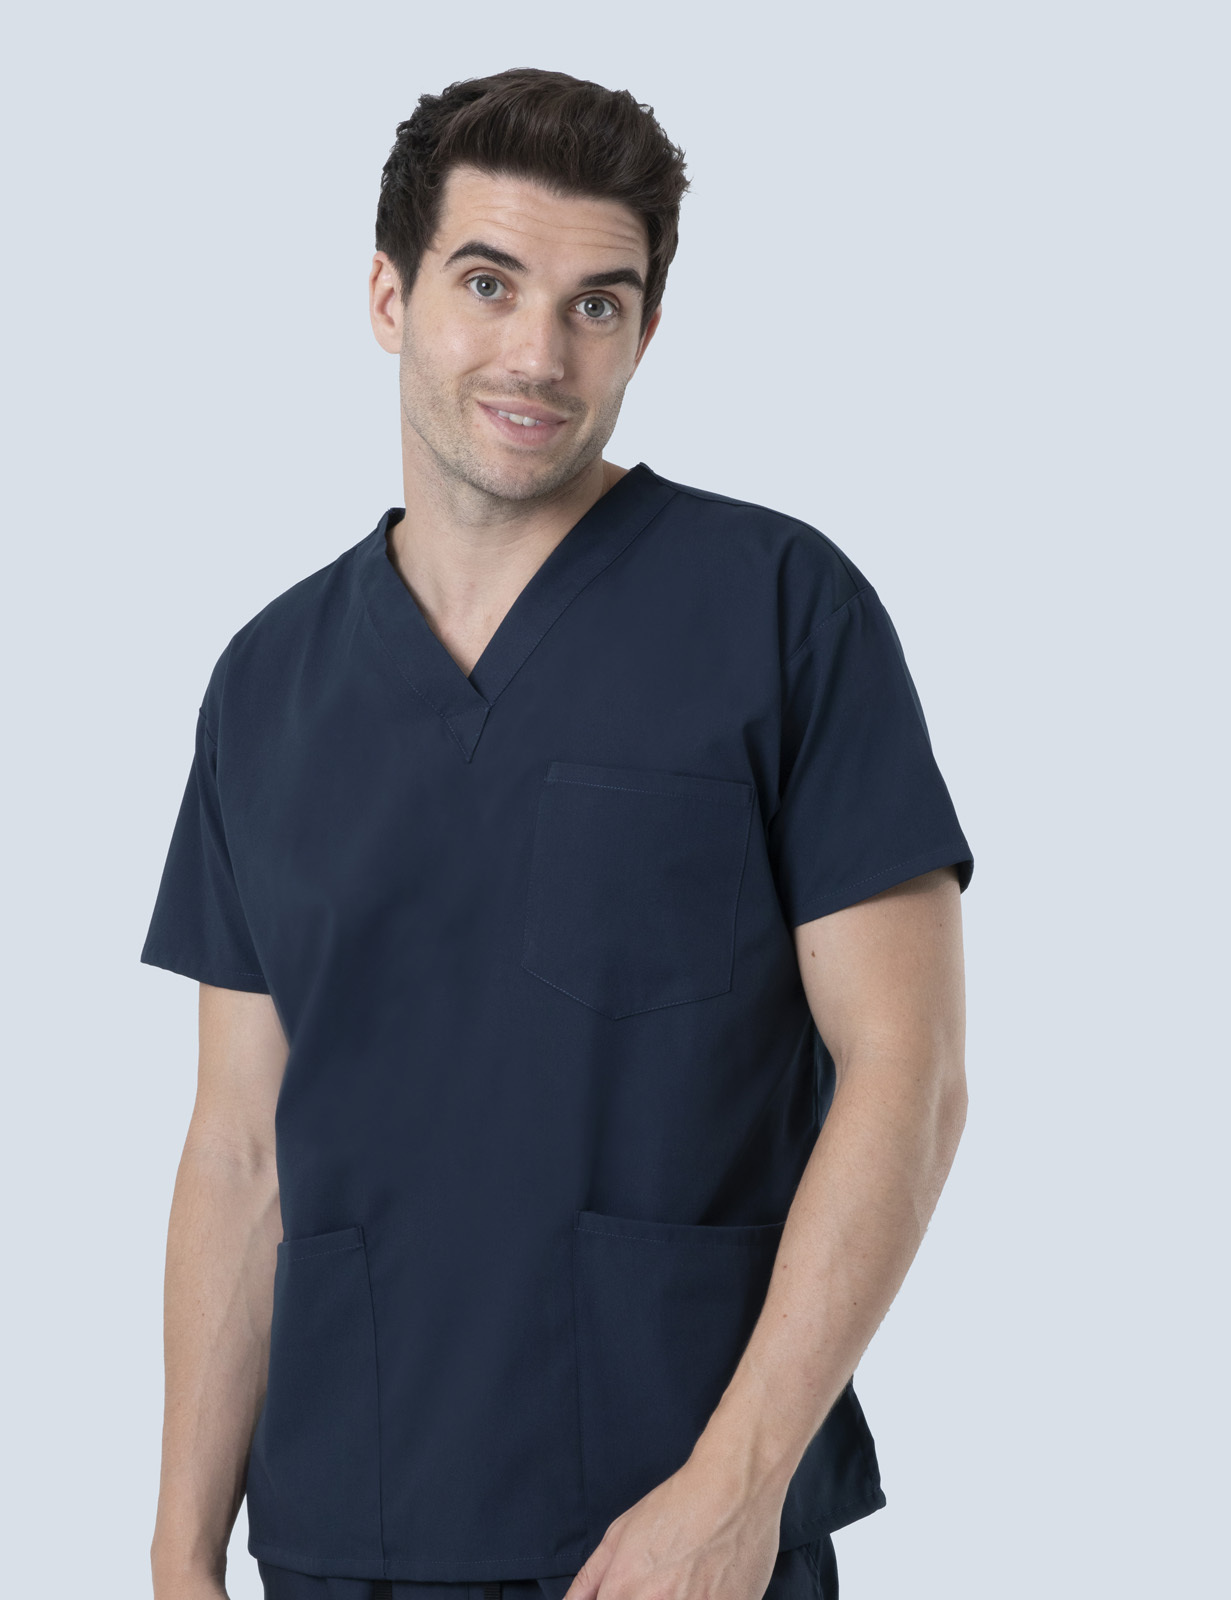 Ipswich Hospital - ED/ER (4 Pocket Scrub Top and Cargo Pants in Navy incl Logos)